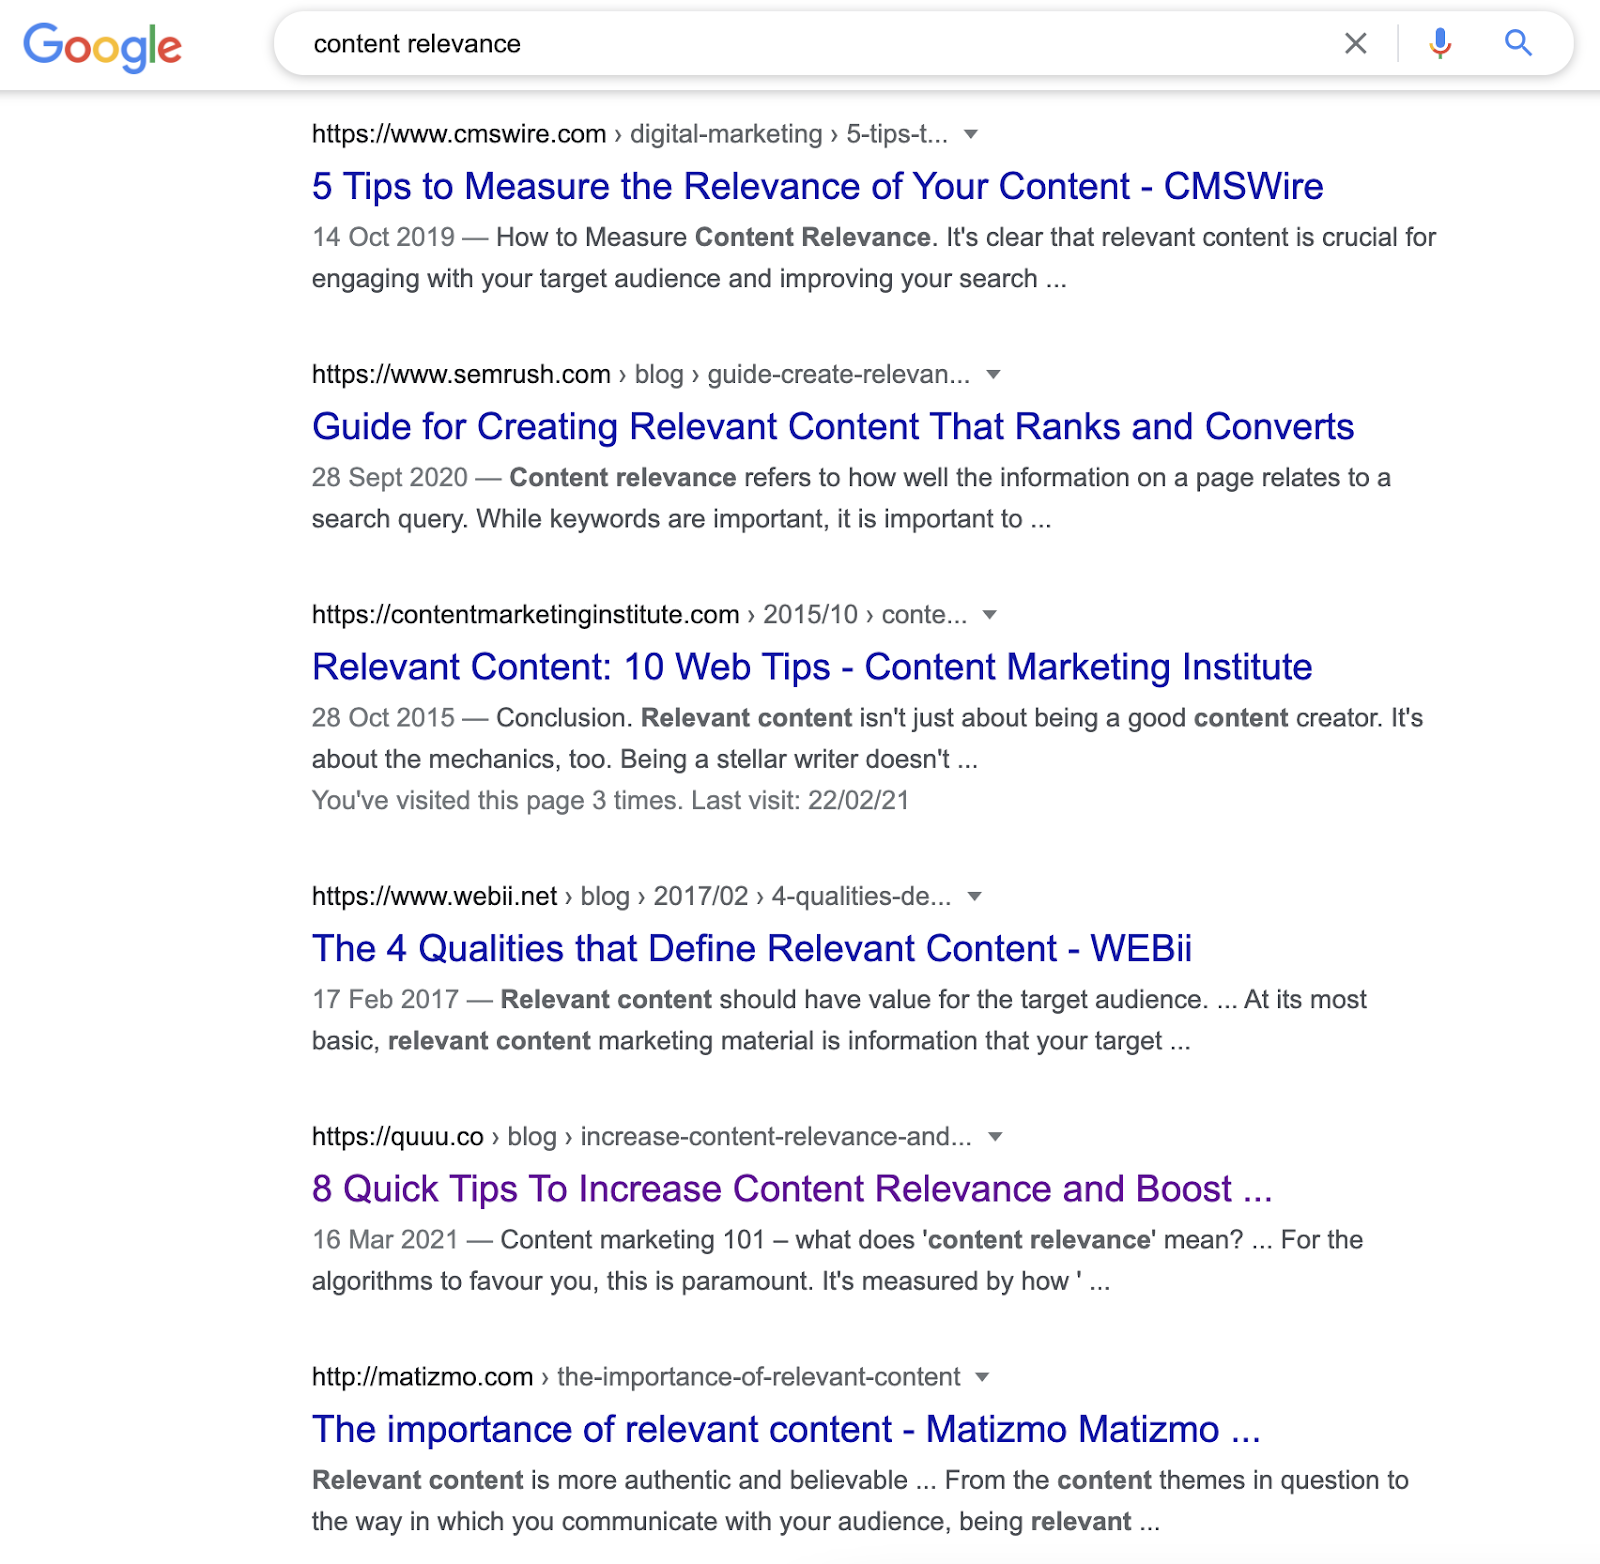 The top Google SERP for the keywords 'content relevance'.